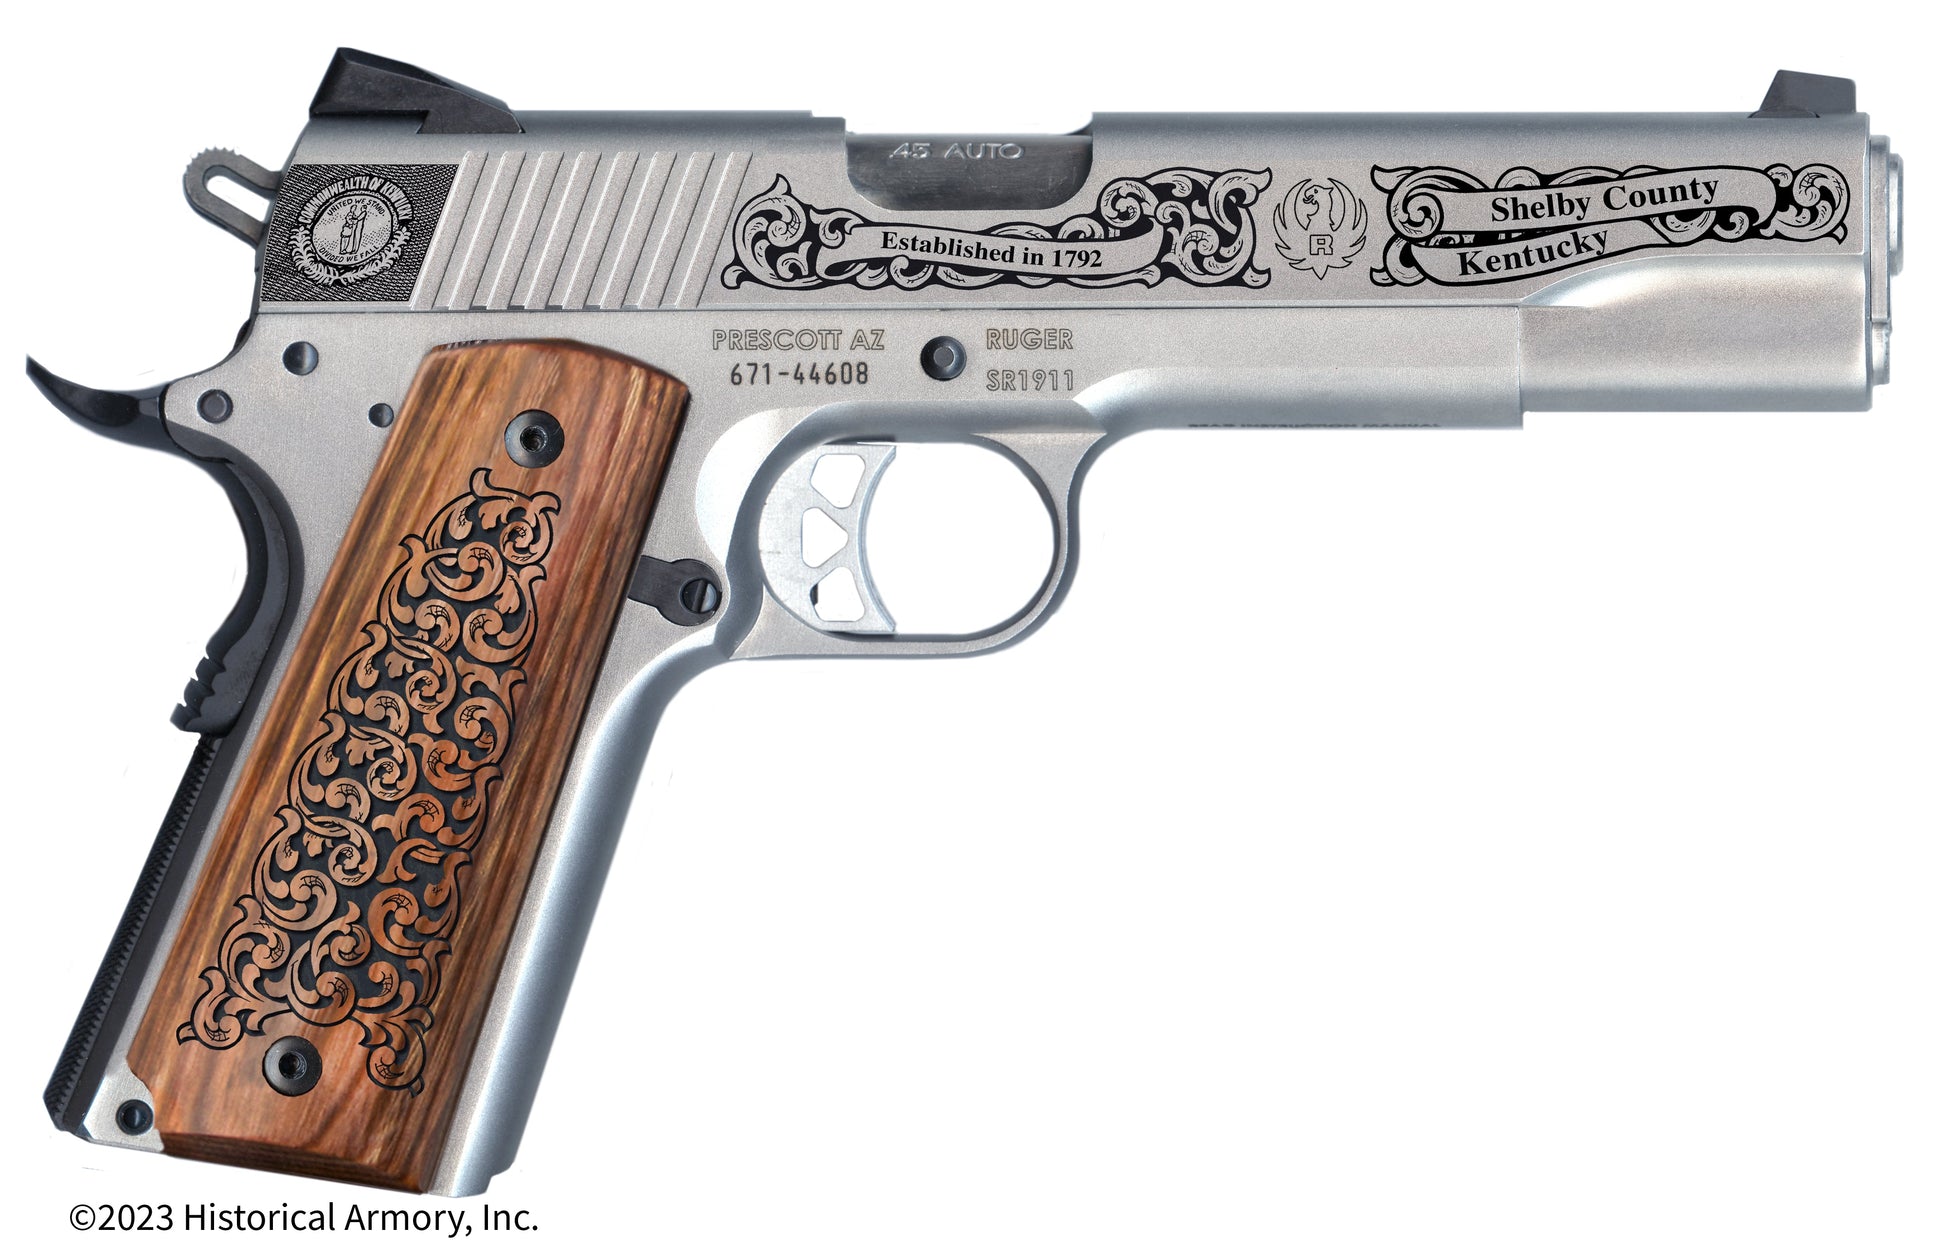 Shelby County Kentucky Engraved .45 Auto Ruger 1911